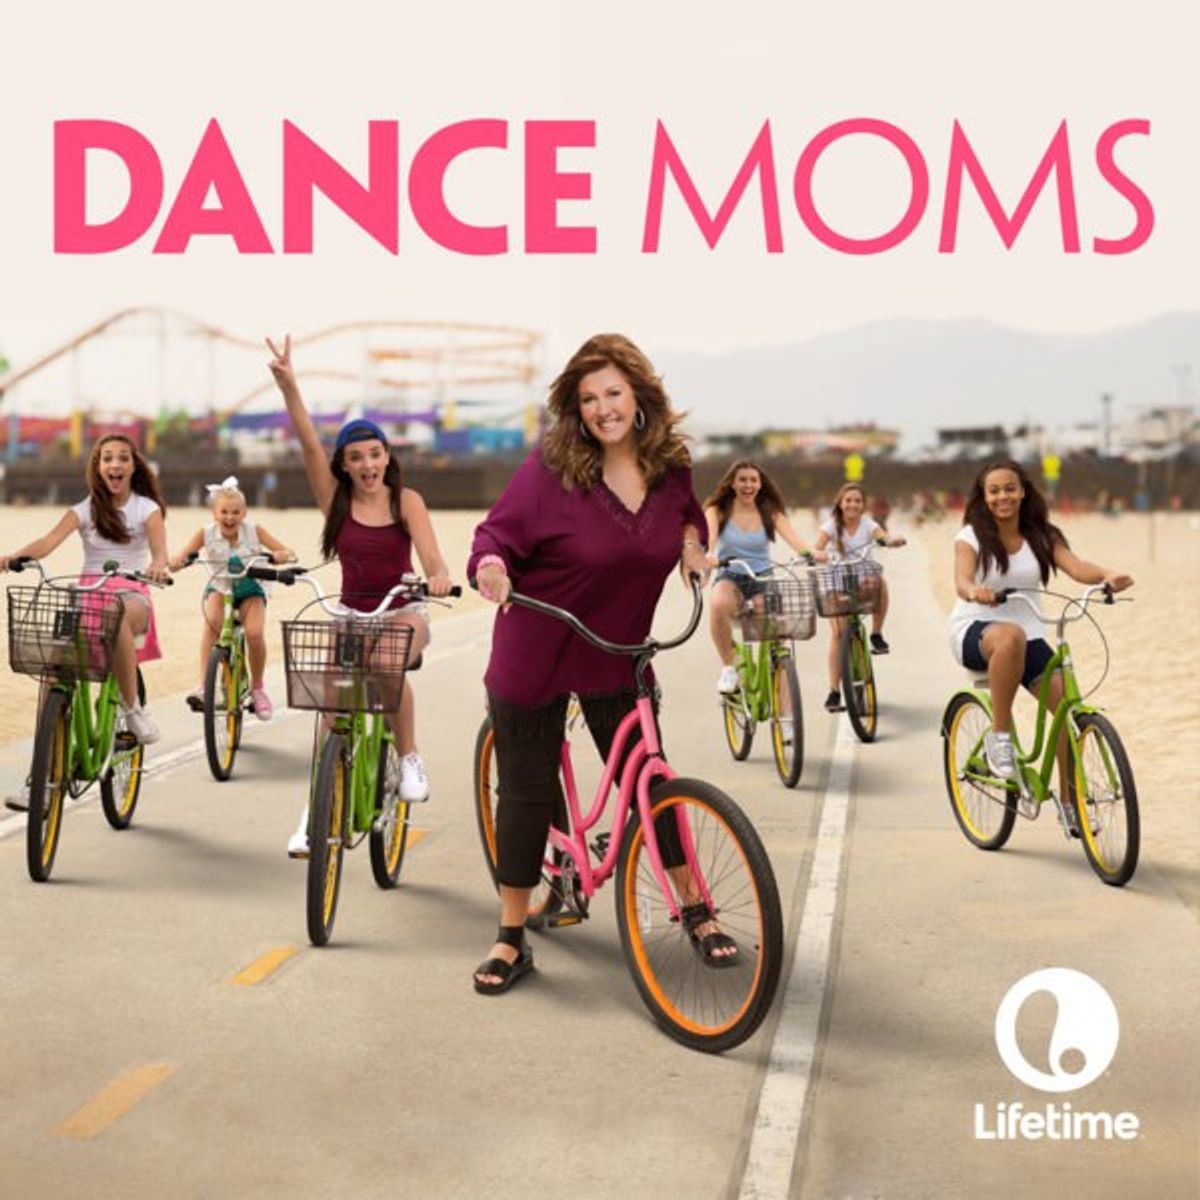 Getting Up In The Morning As Told By "Dance Moms"